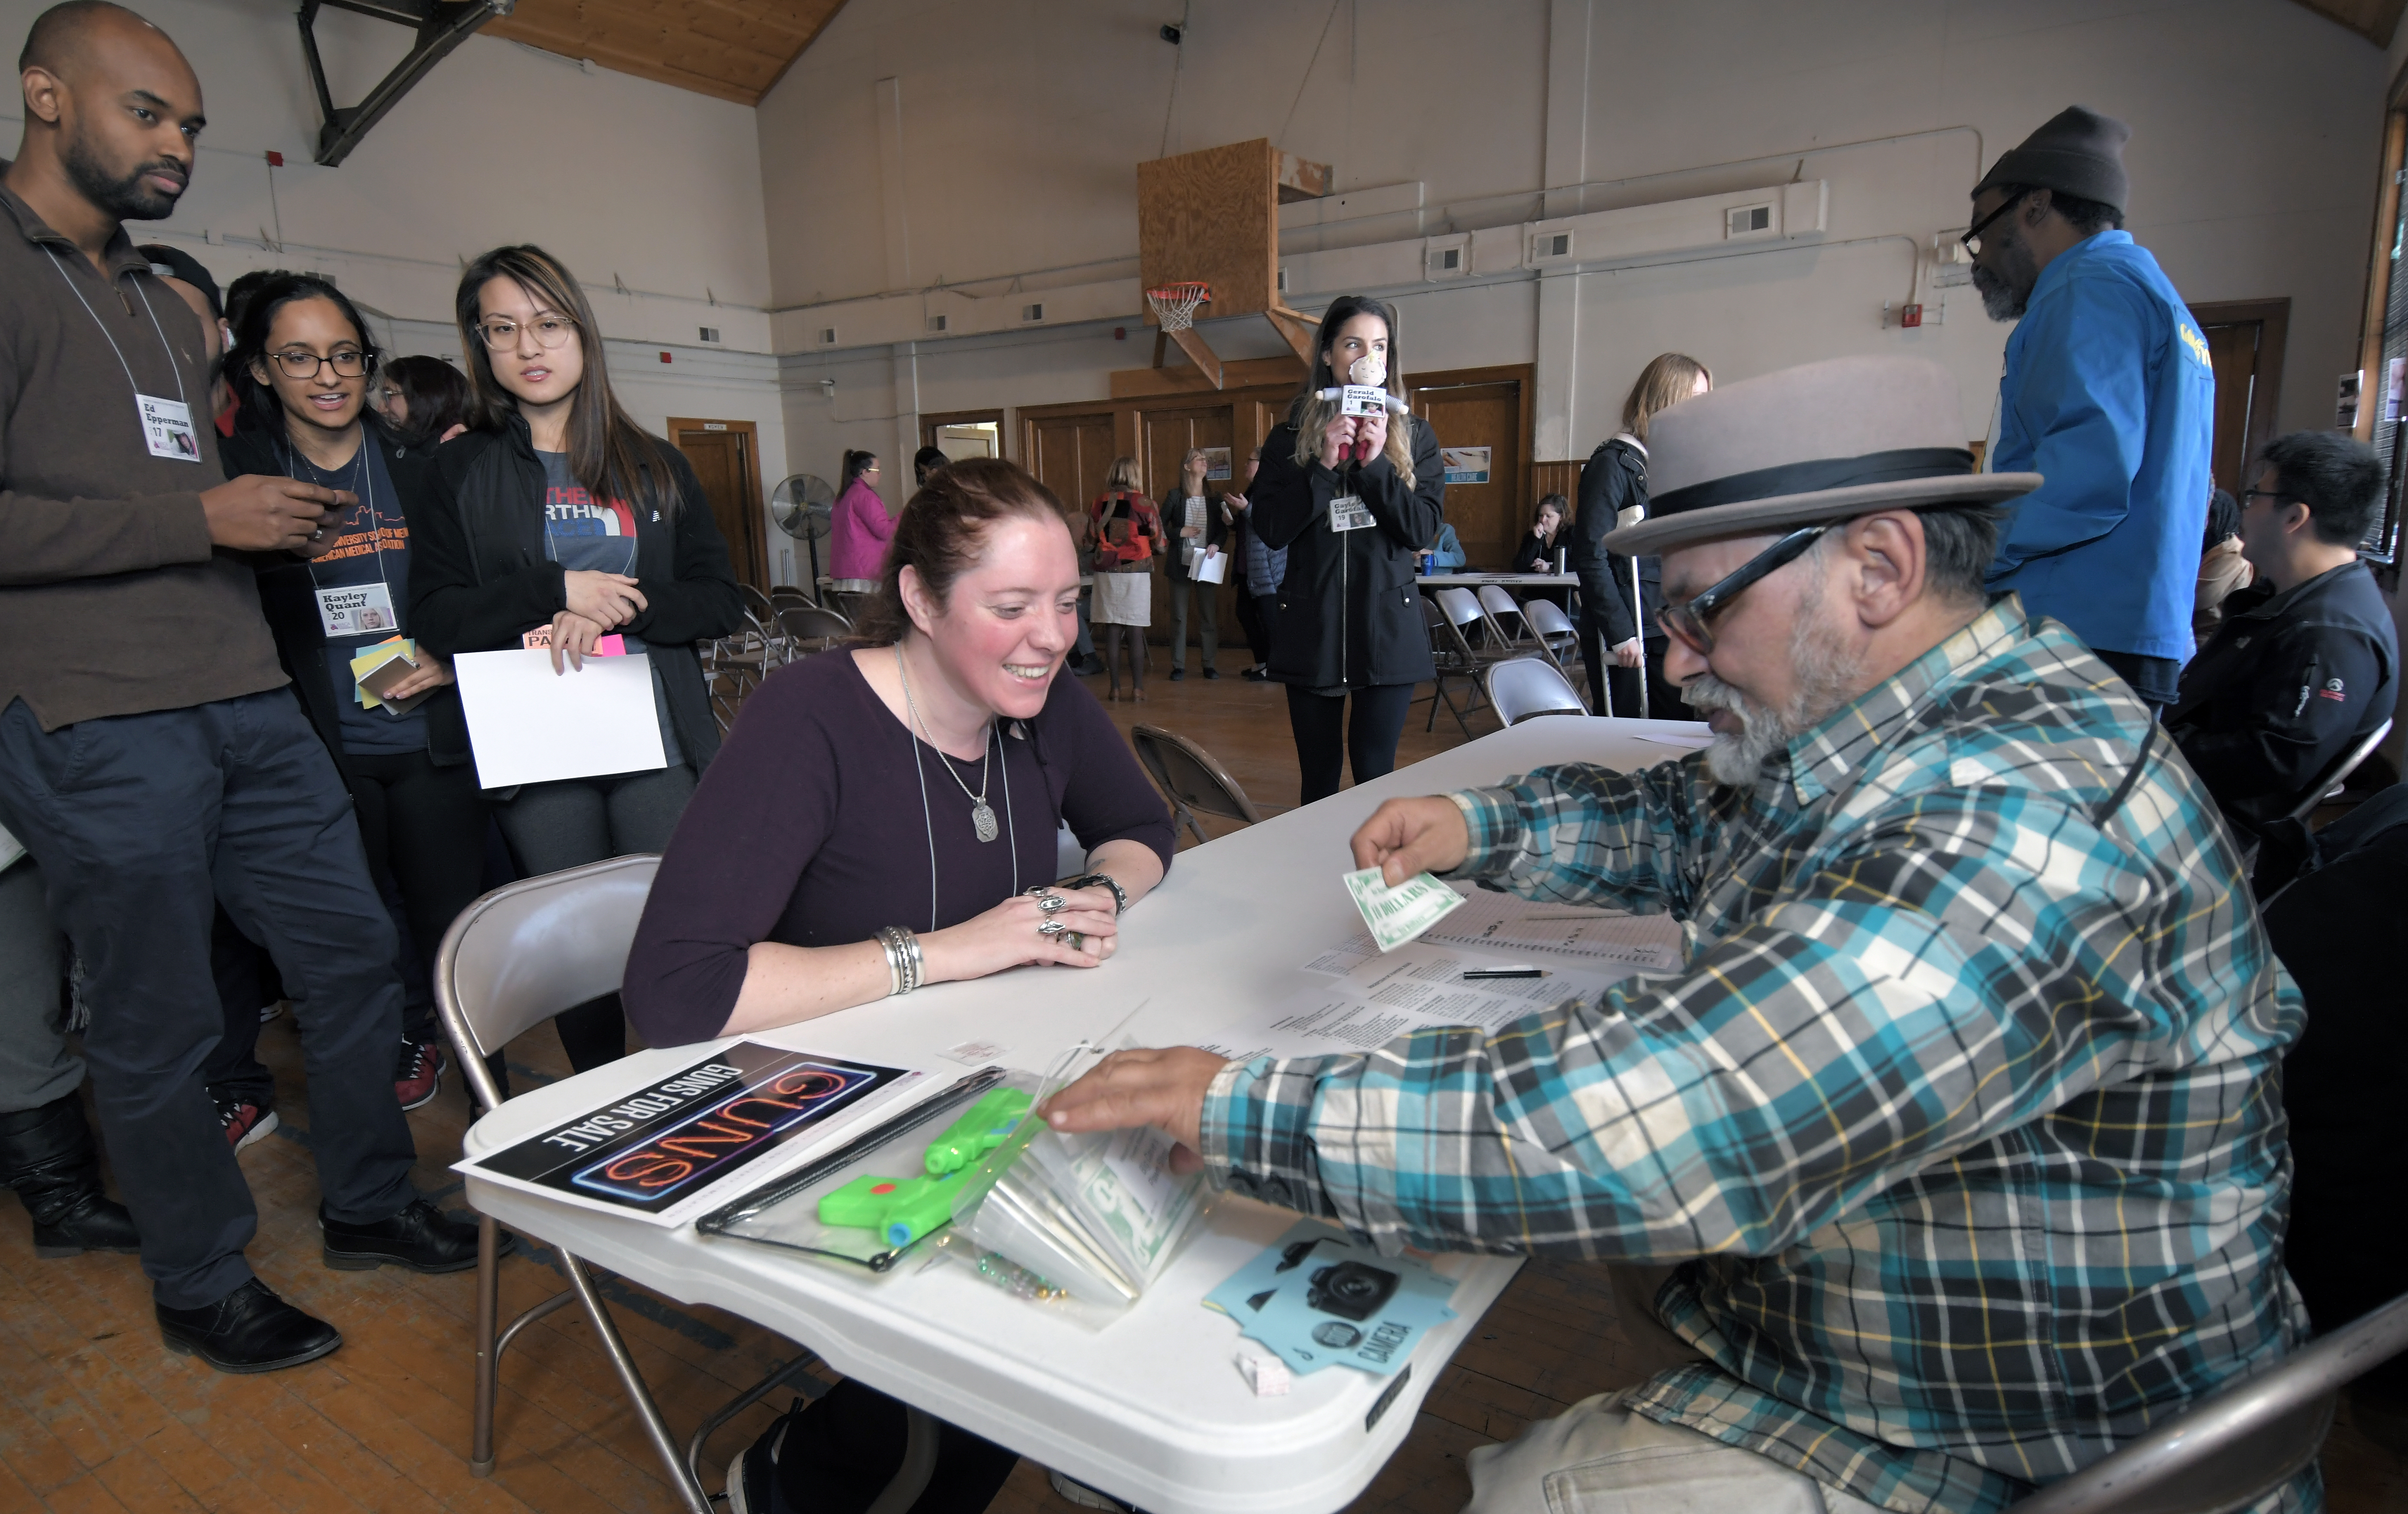 Poverty Simulation Training Brings Students and Community Together